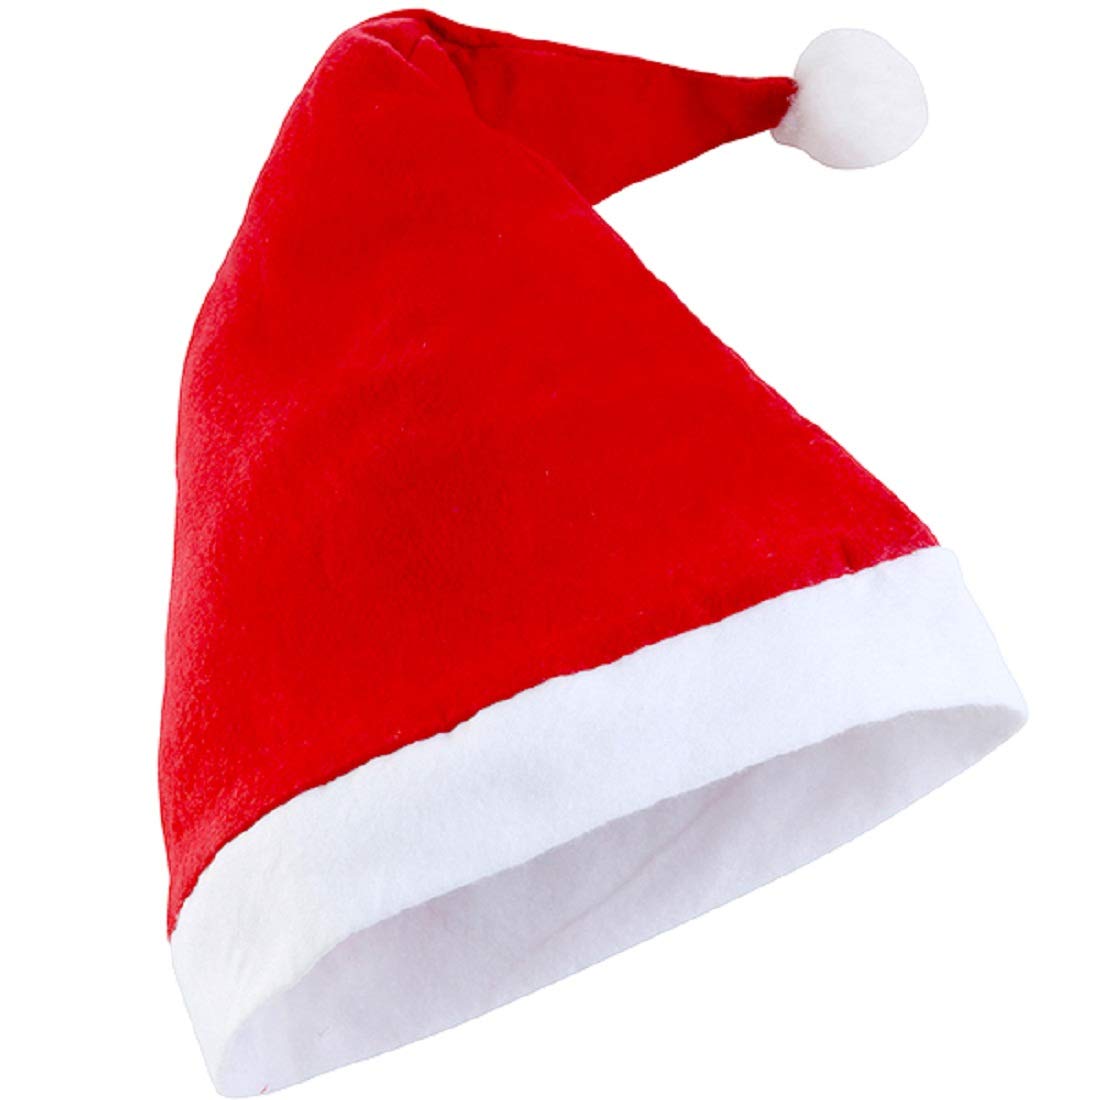 eCraftIndia Red and White Merry Christmas Hats, Santa Claus Caps for kids and Adults - Free Size XMAS Caps, Santa Claus Hats for Christmas, New Year, Festive Holiday Party (Set of 12) 2